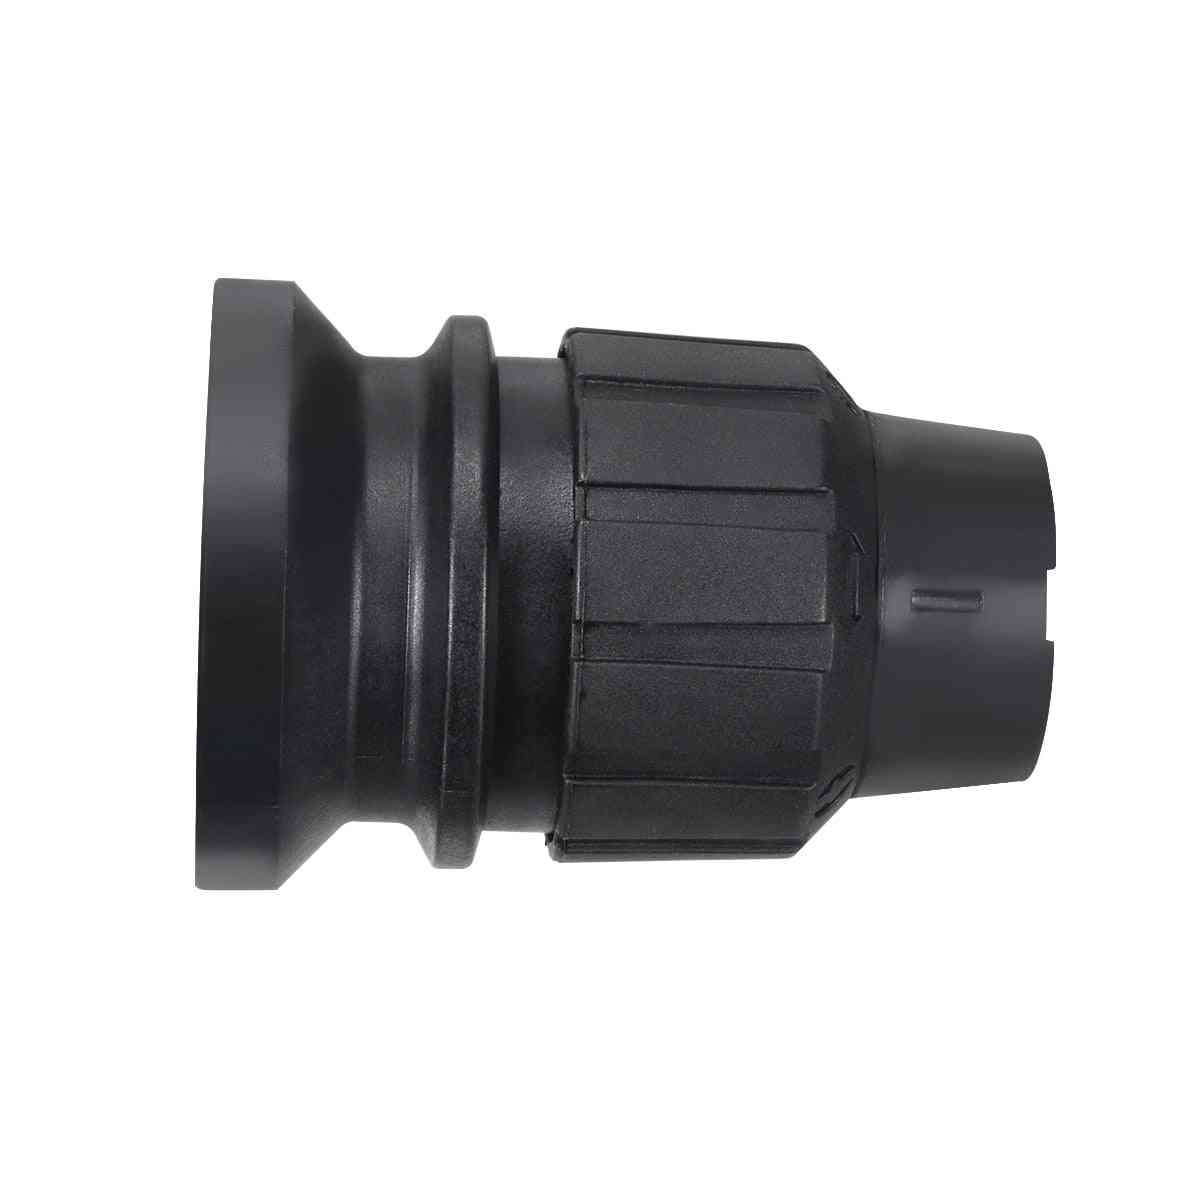 Black Replacement Chuck Accessory For Rotary Hammer/drills